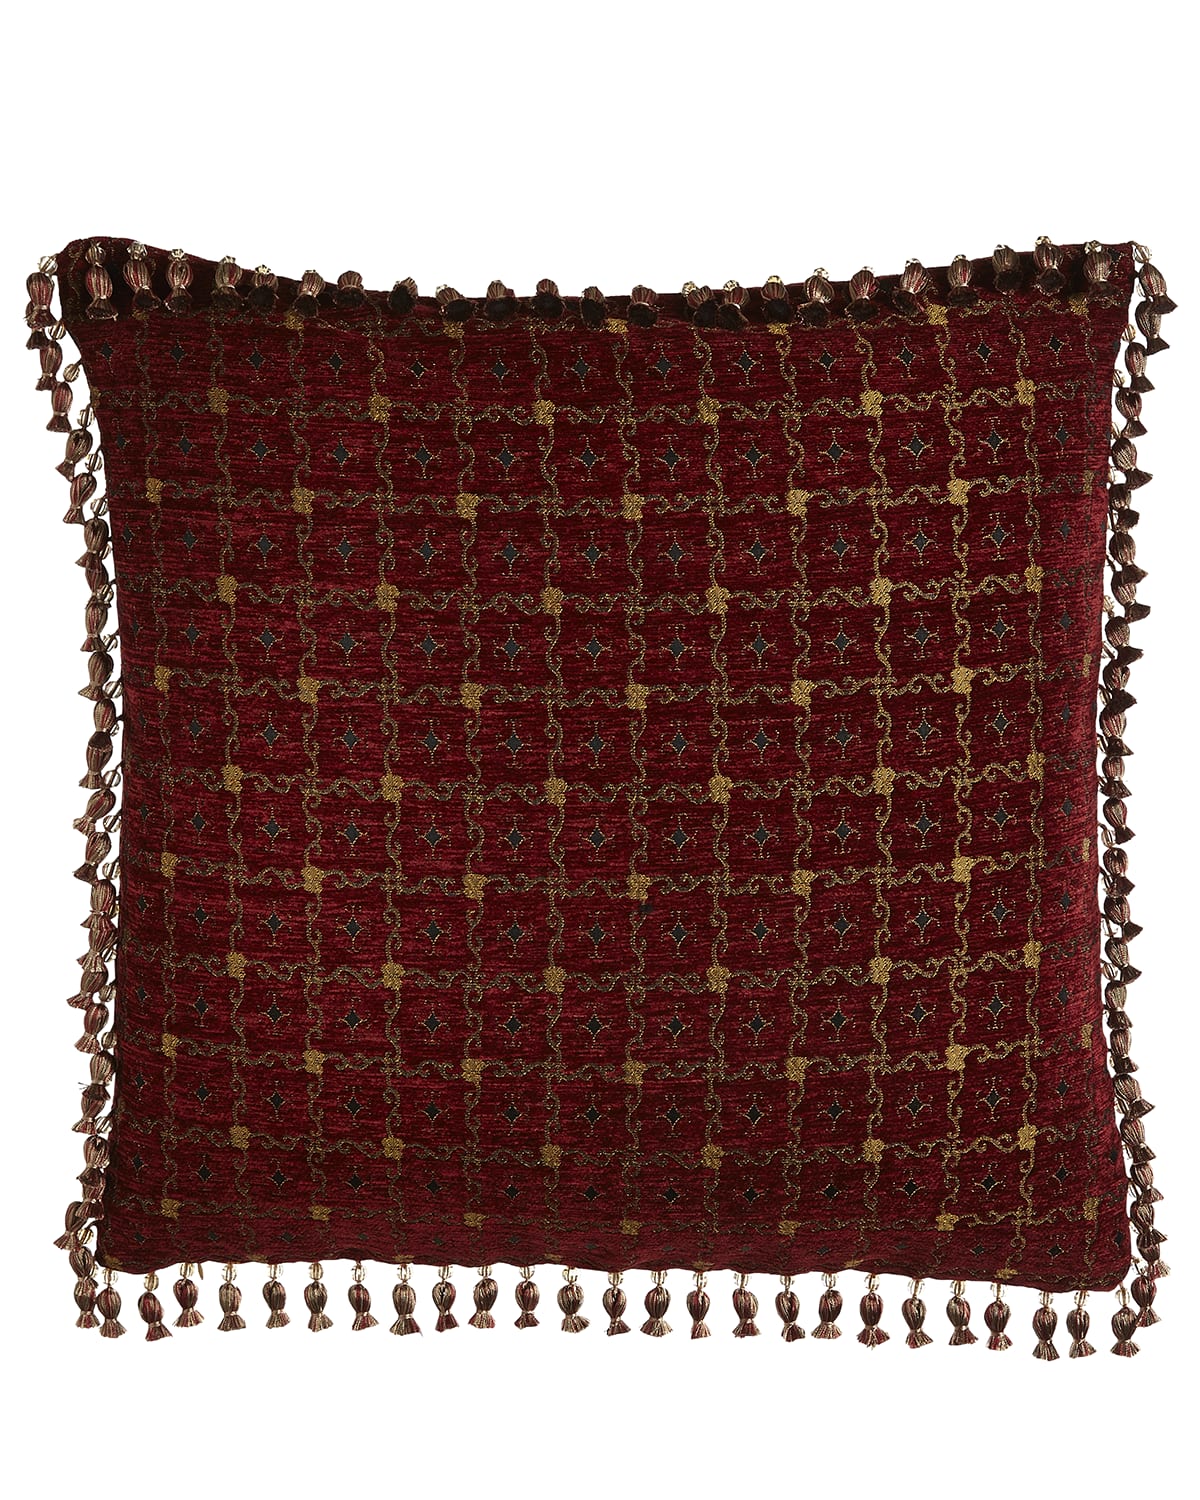 Image Austin Horn Collection Scarlet Reversible European Sham with Beaded Onion Fringe